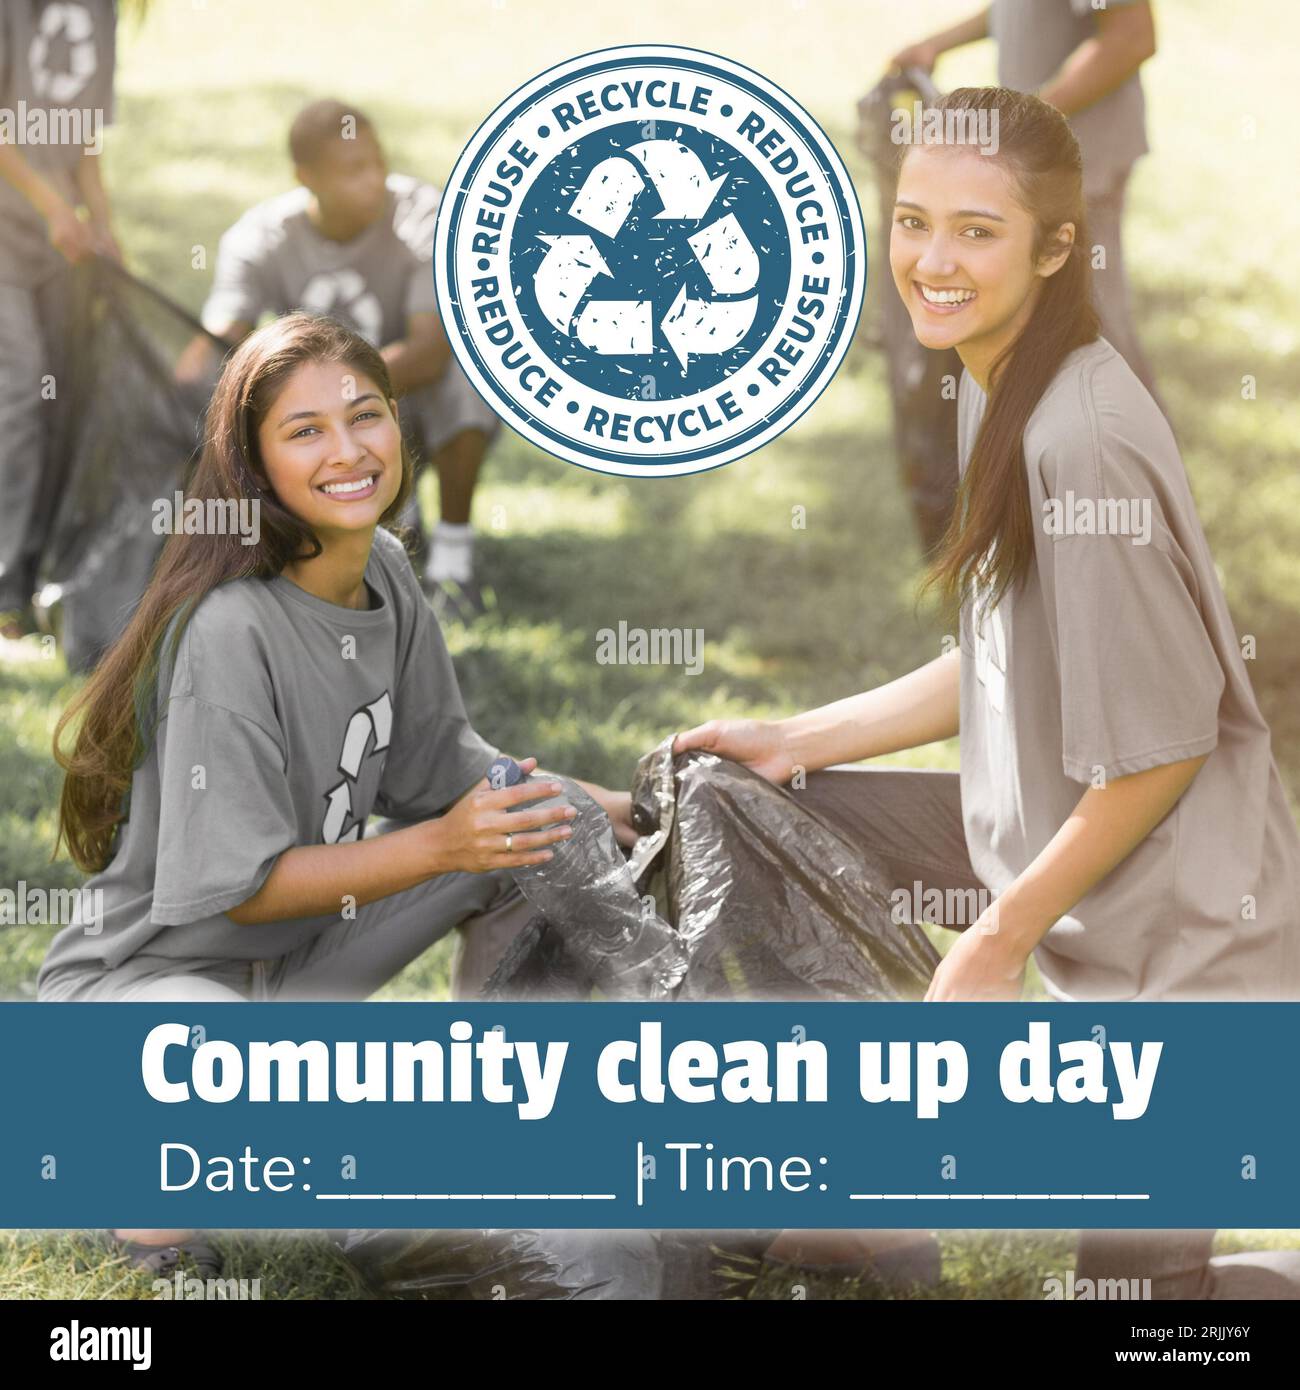 Composite of community clean up day text over diverse girls recycling Stock Photo